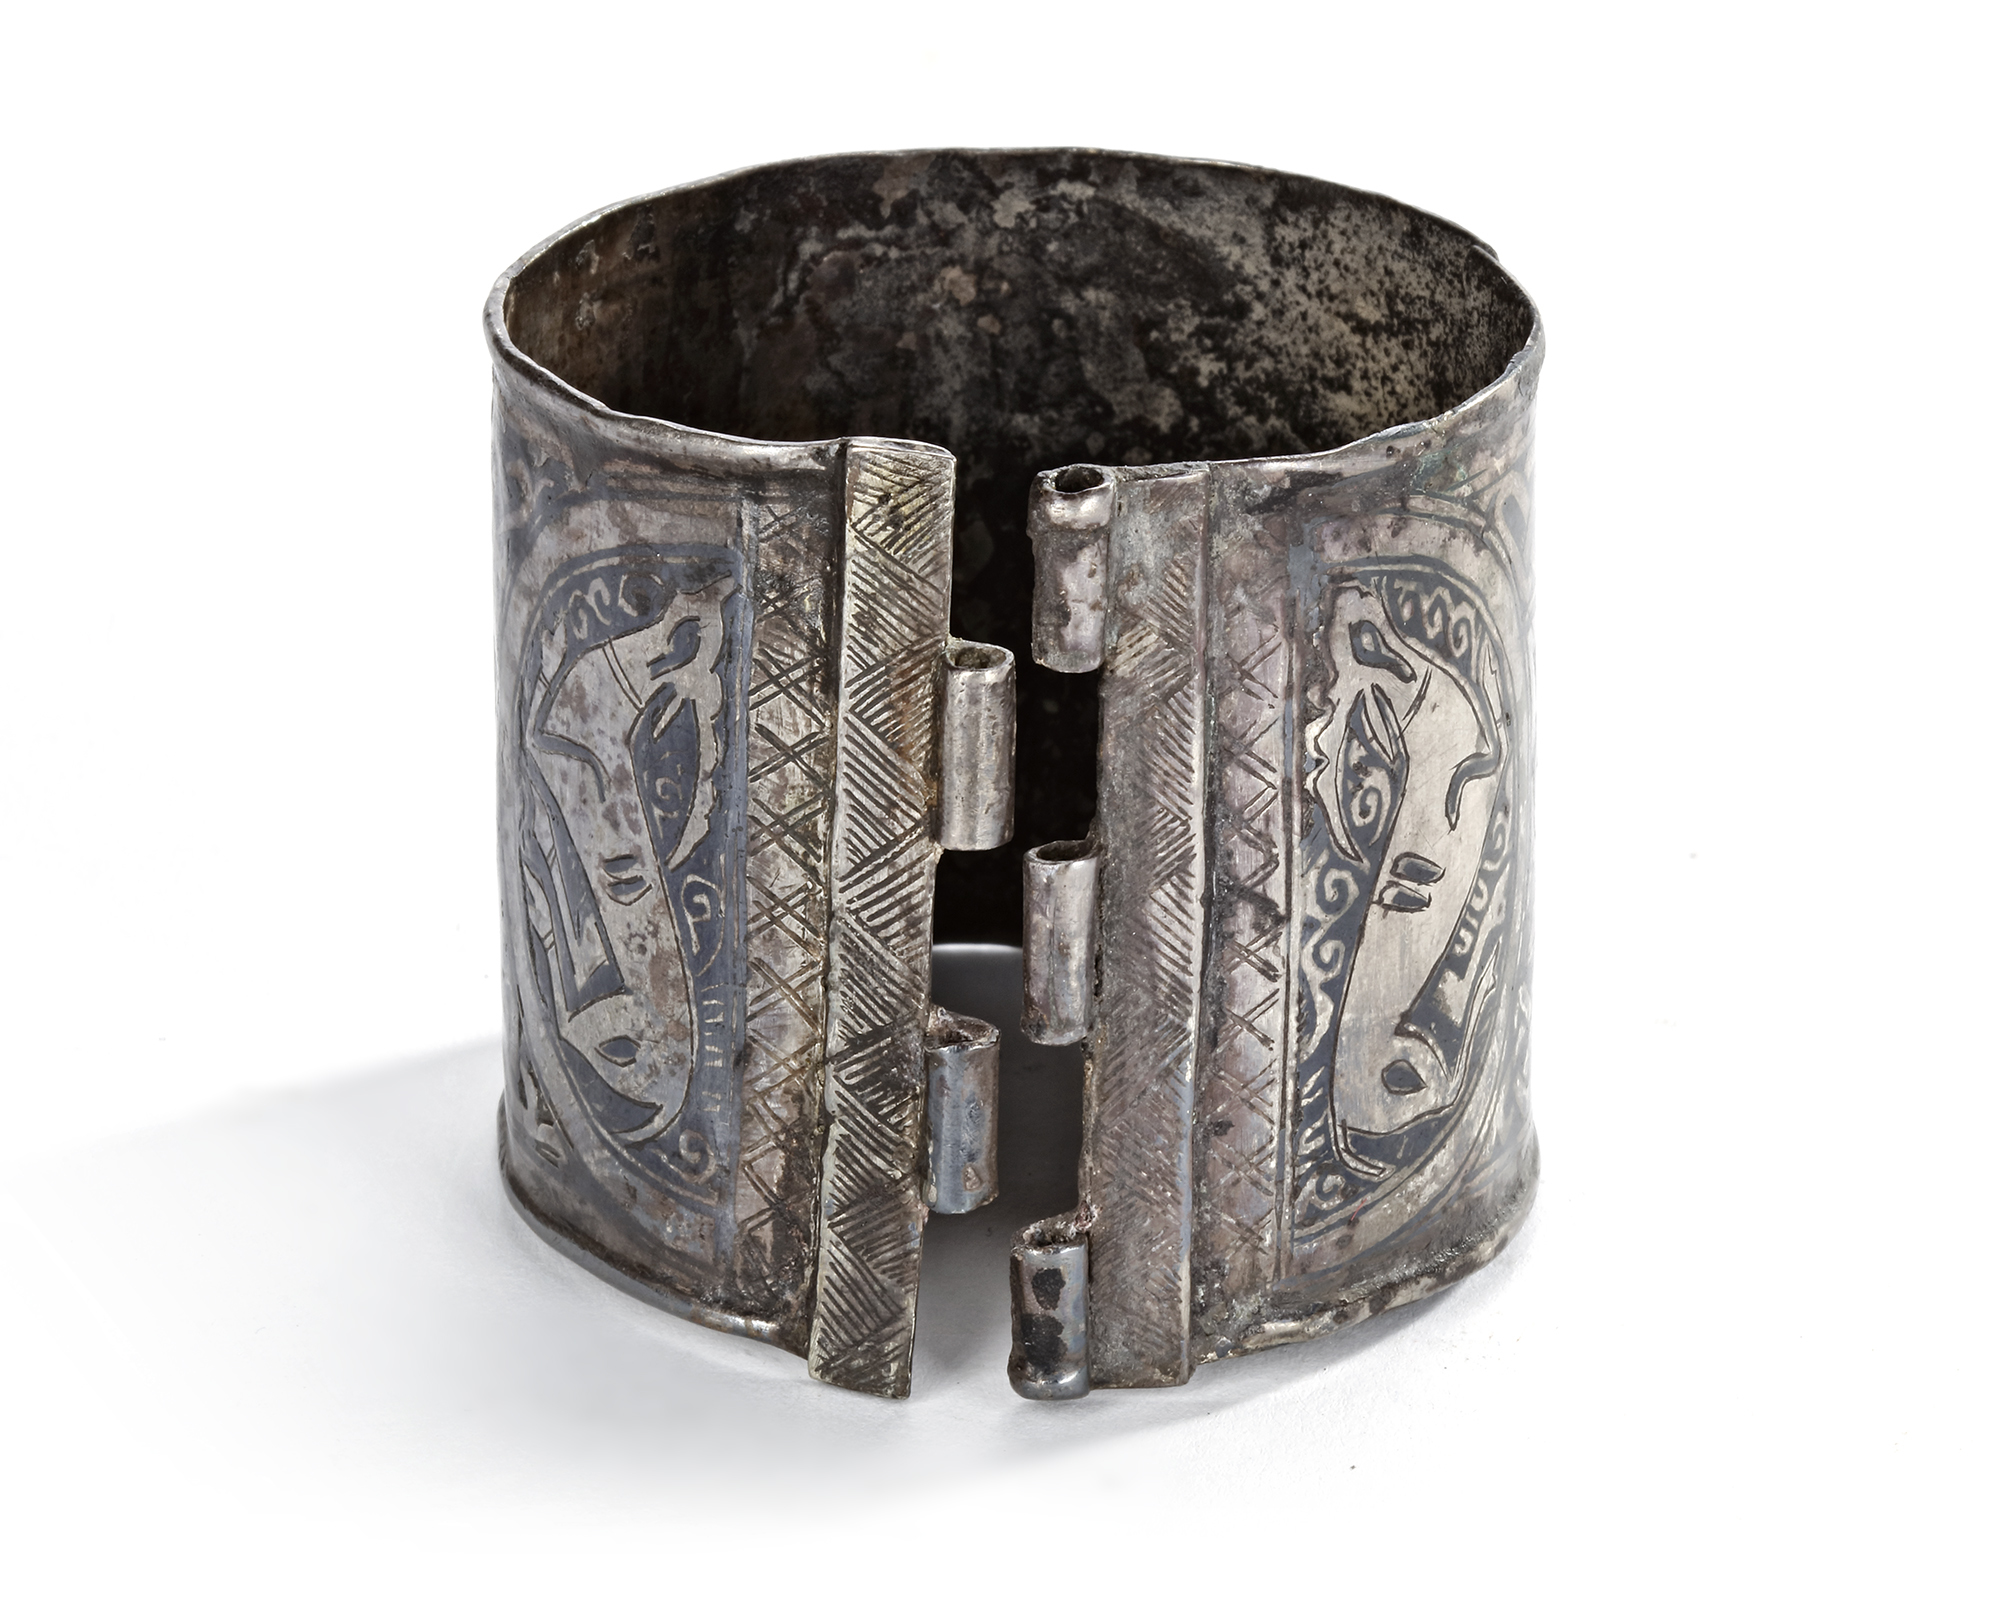 A SILVER AND NIELLO BRACELET WITH KUFIC INSCRIPTION, 11TH-12TH CENTURY - Image 6 of 6